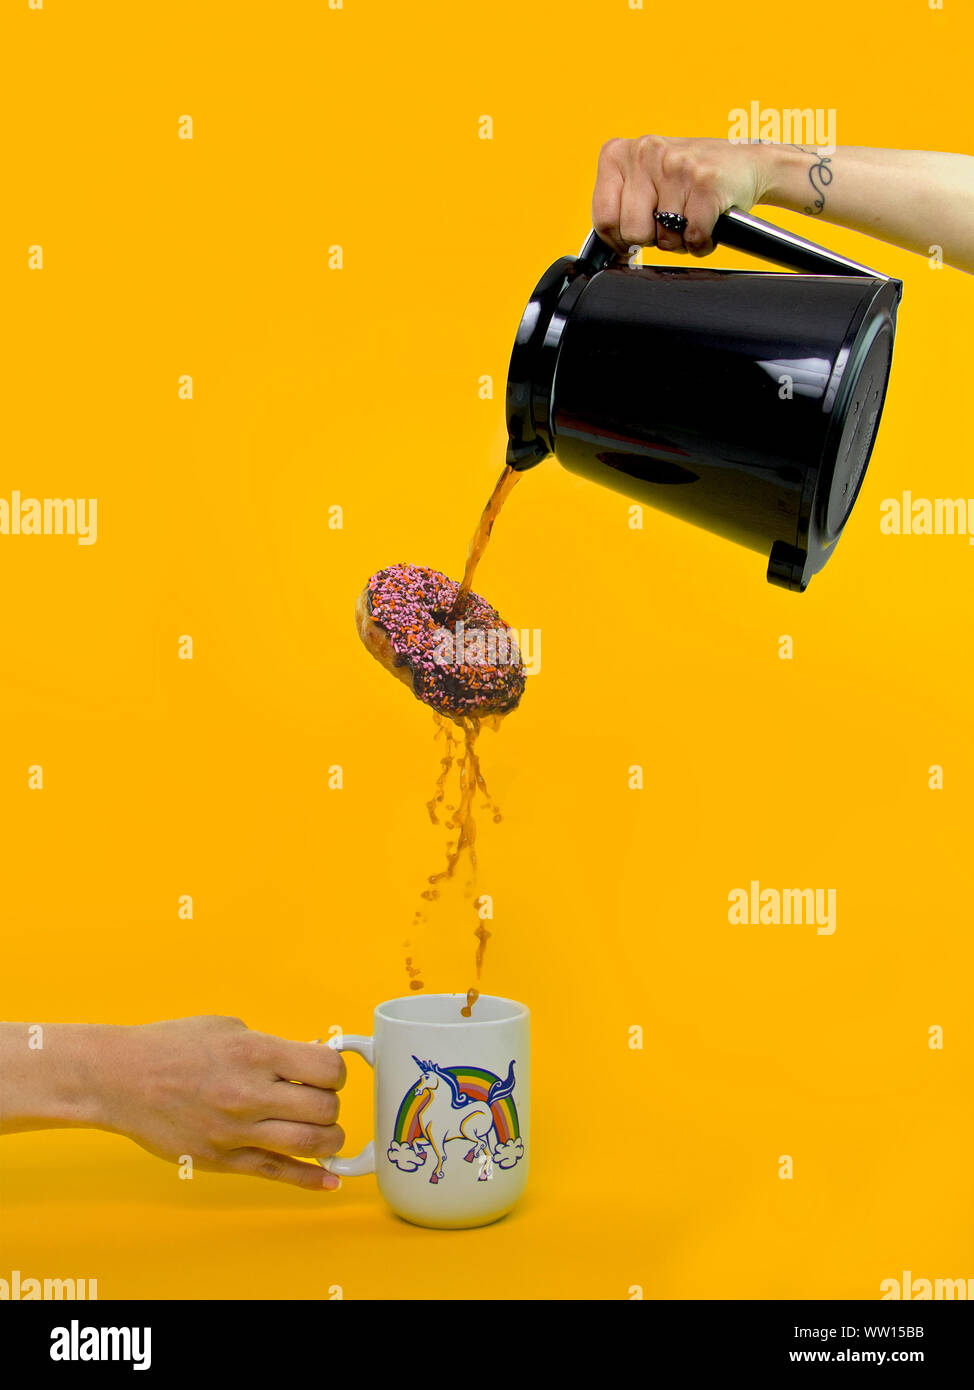 Cropped Image Of Hand Pouring Coffee Through Donut Hole Against Yellow Background Stock Photo